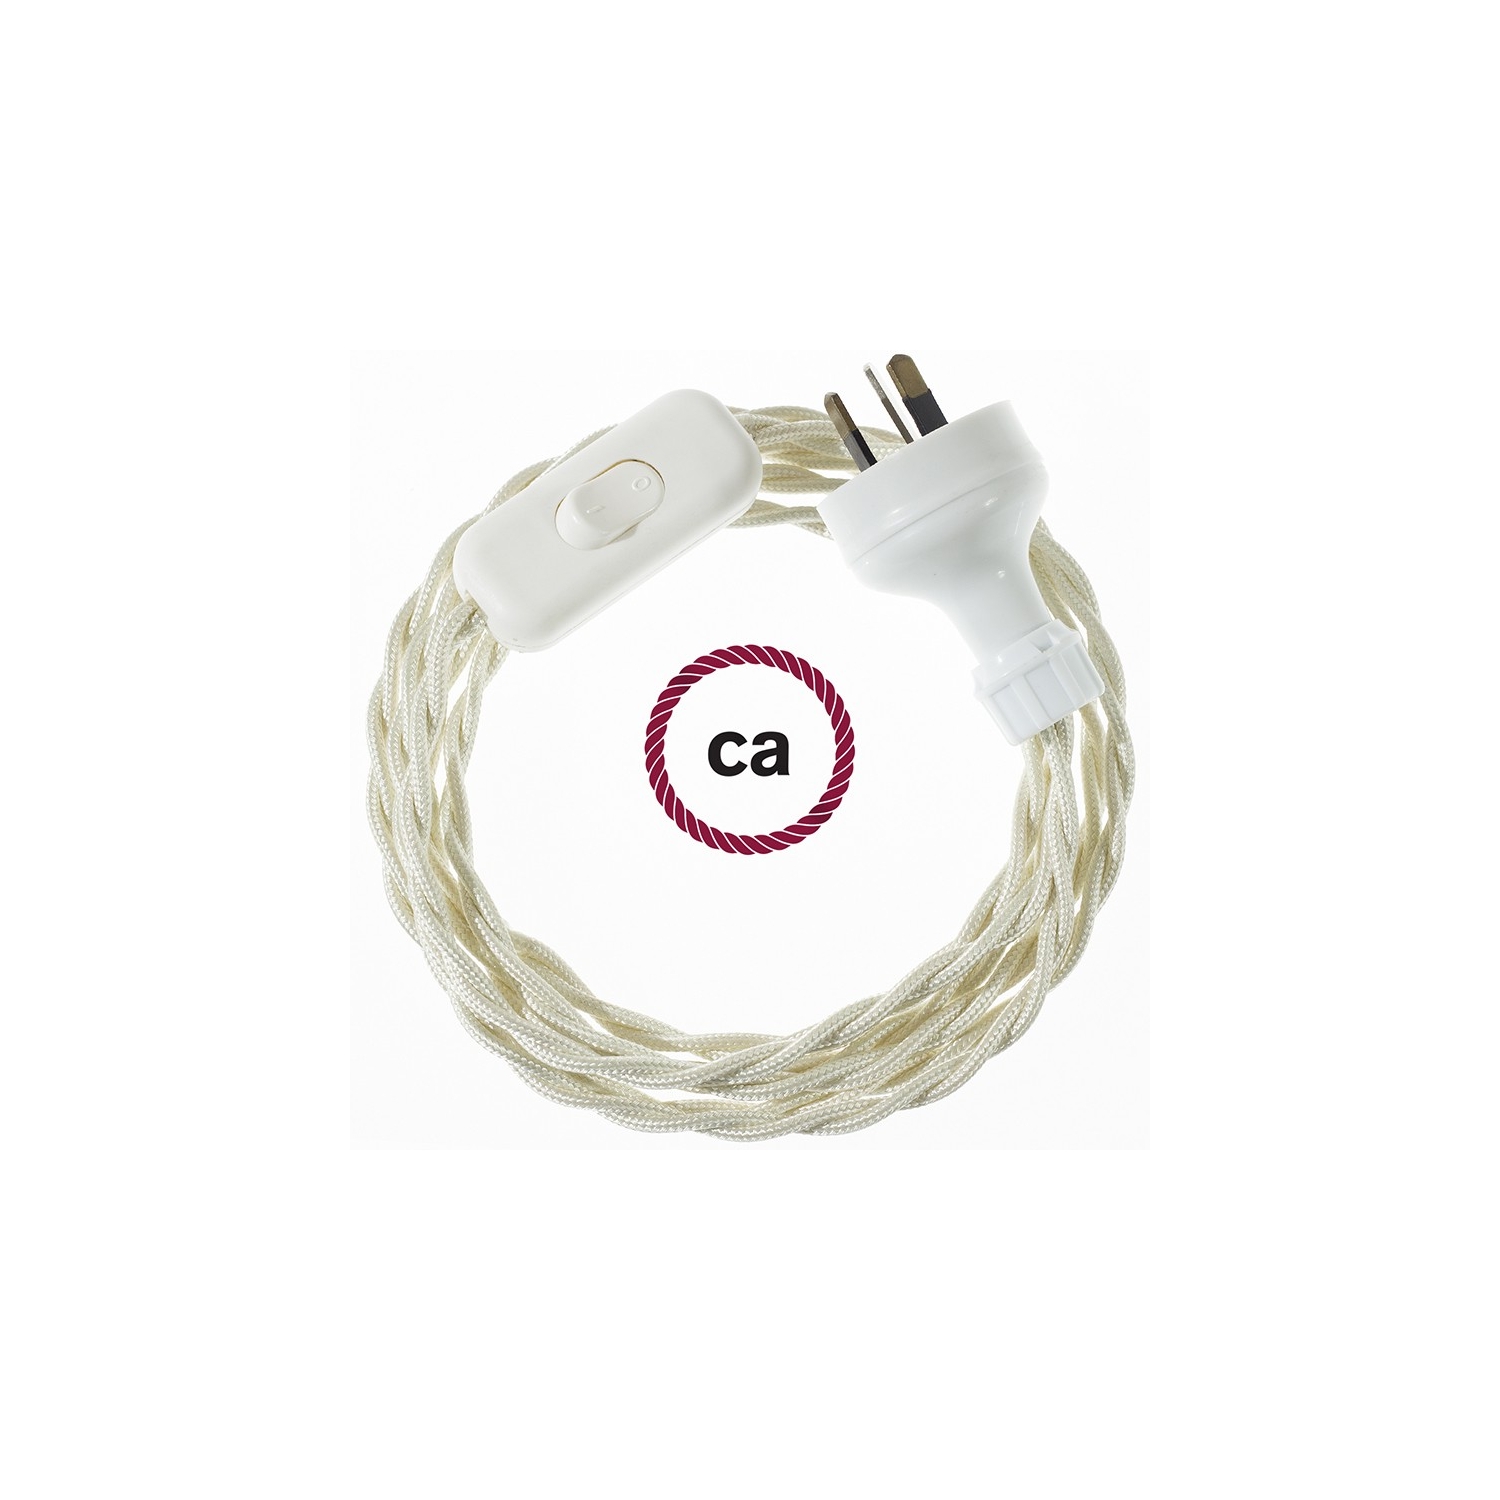 Wiring Ivory Rayon textile cable TM00 - 1.80 mt